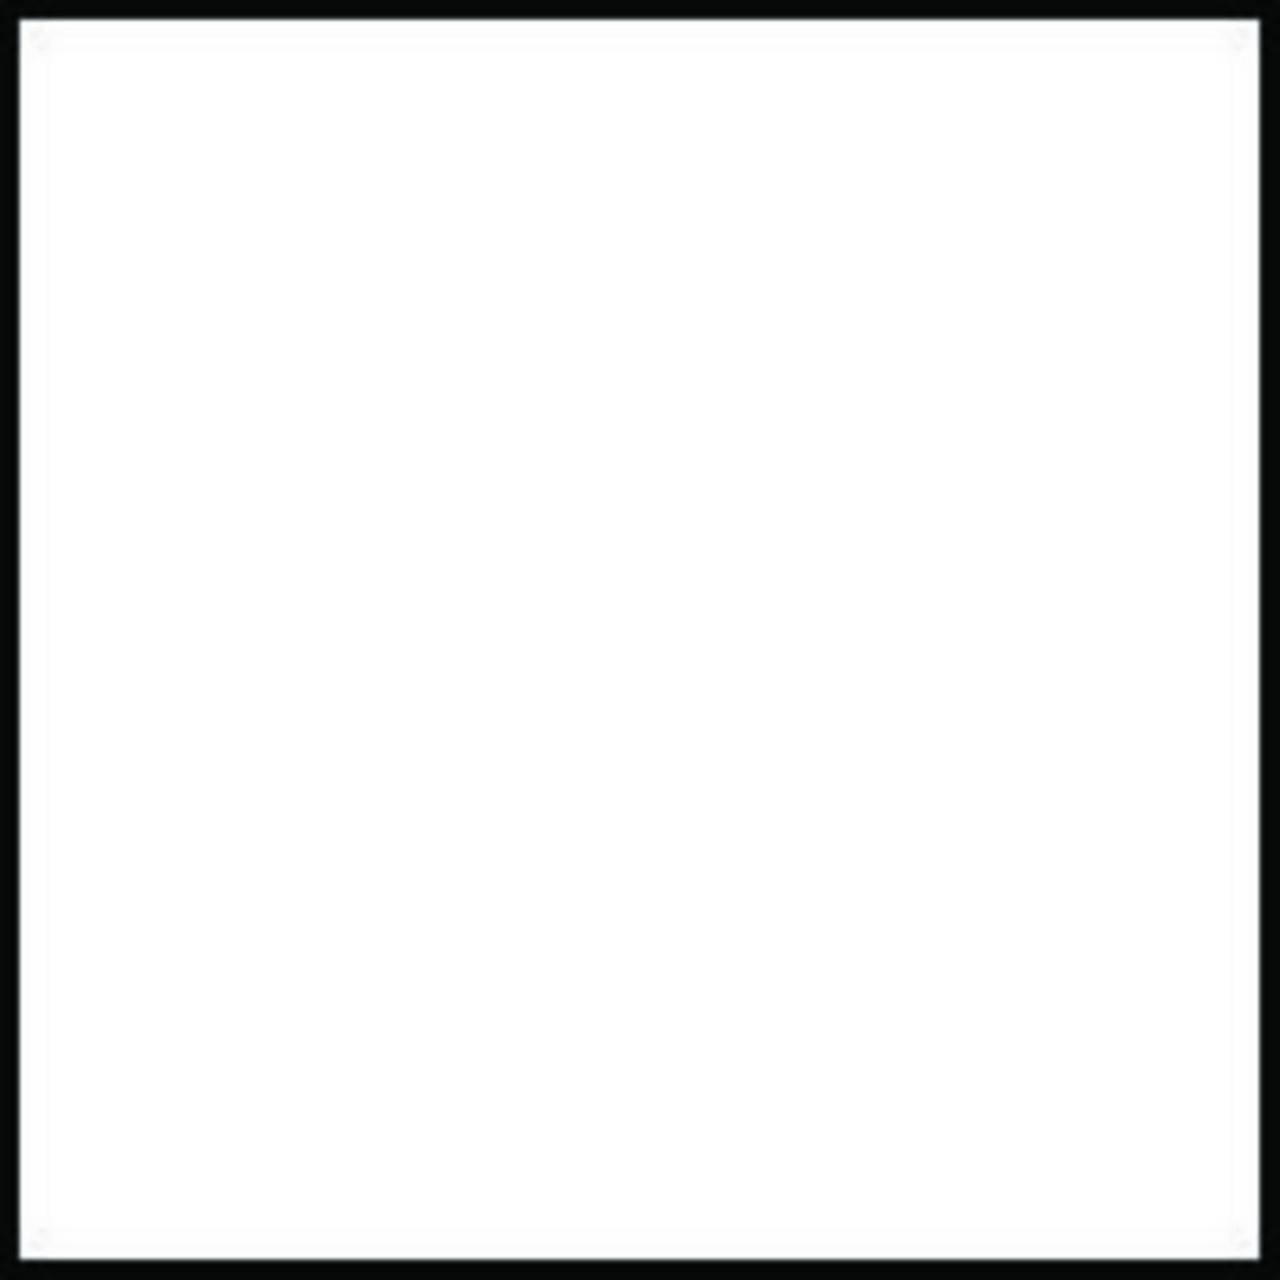 Canson 400026878 XL Series Oil and Acrylic Paper Pad 11x14" White 24 Sheet 136lb 